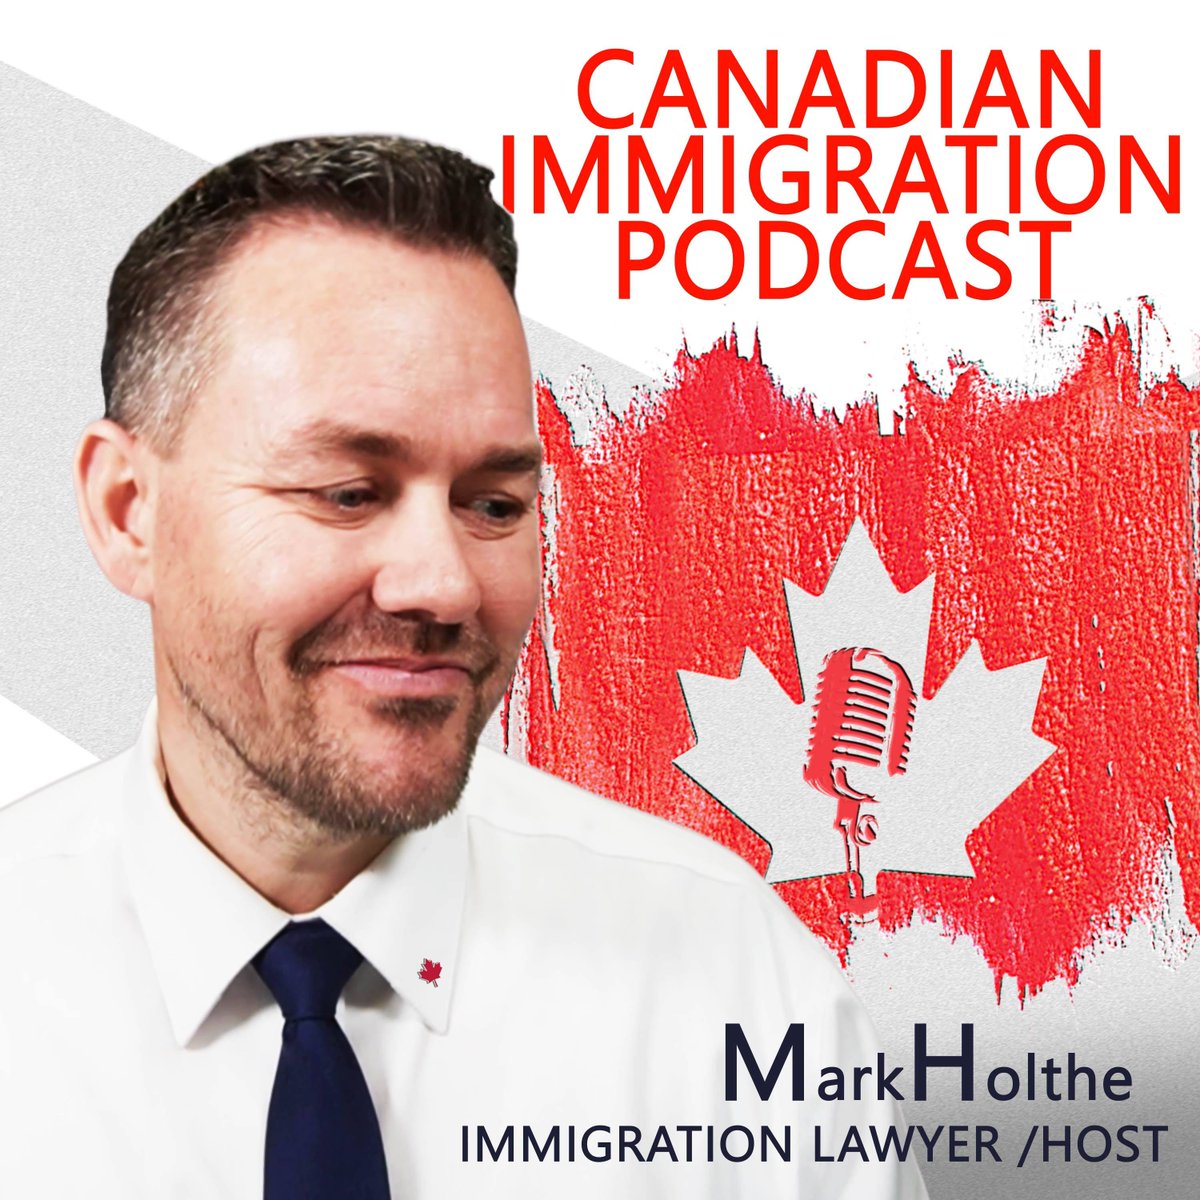 🇨🇦SUV Caps and Self Employed Suspension🇨🇦 #cdnimm - Alicia and I are going to record a quick episode on these massive changes for our #CanadianImmigrationPodcast. As a part of this 'quick release' episode, I am hoping to get some questions from viewers🙋‍♂️🙋‍♂️ and listeners 'in…